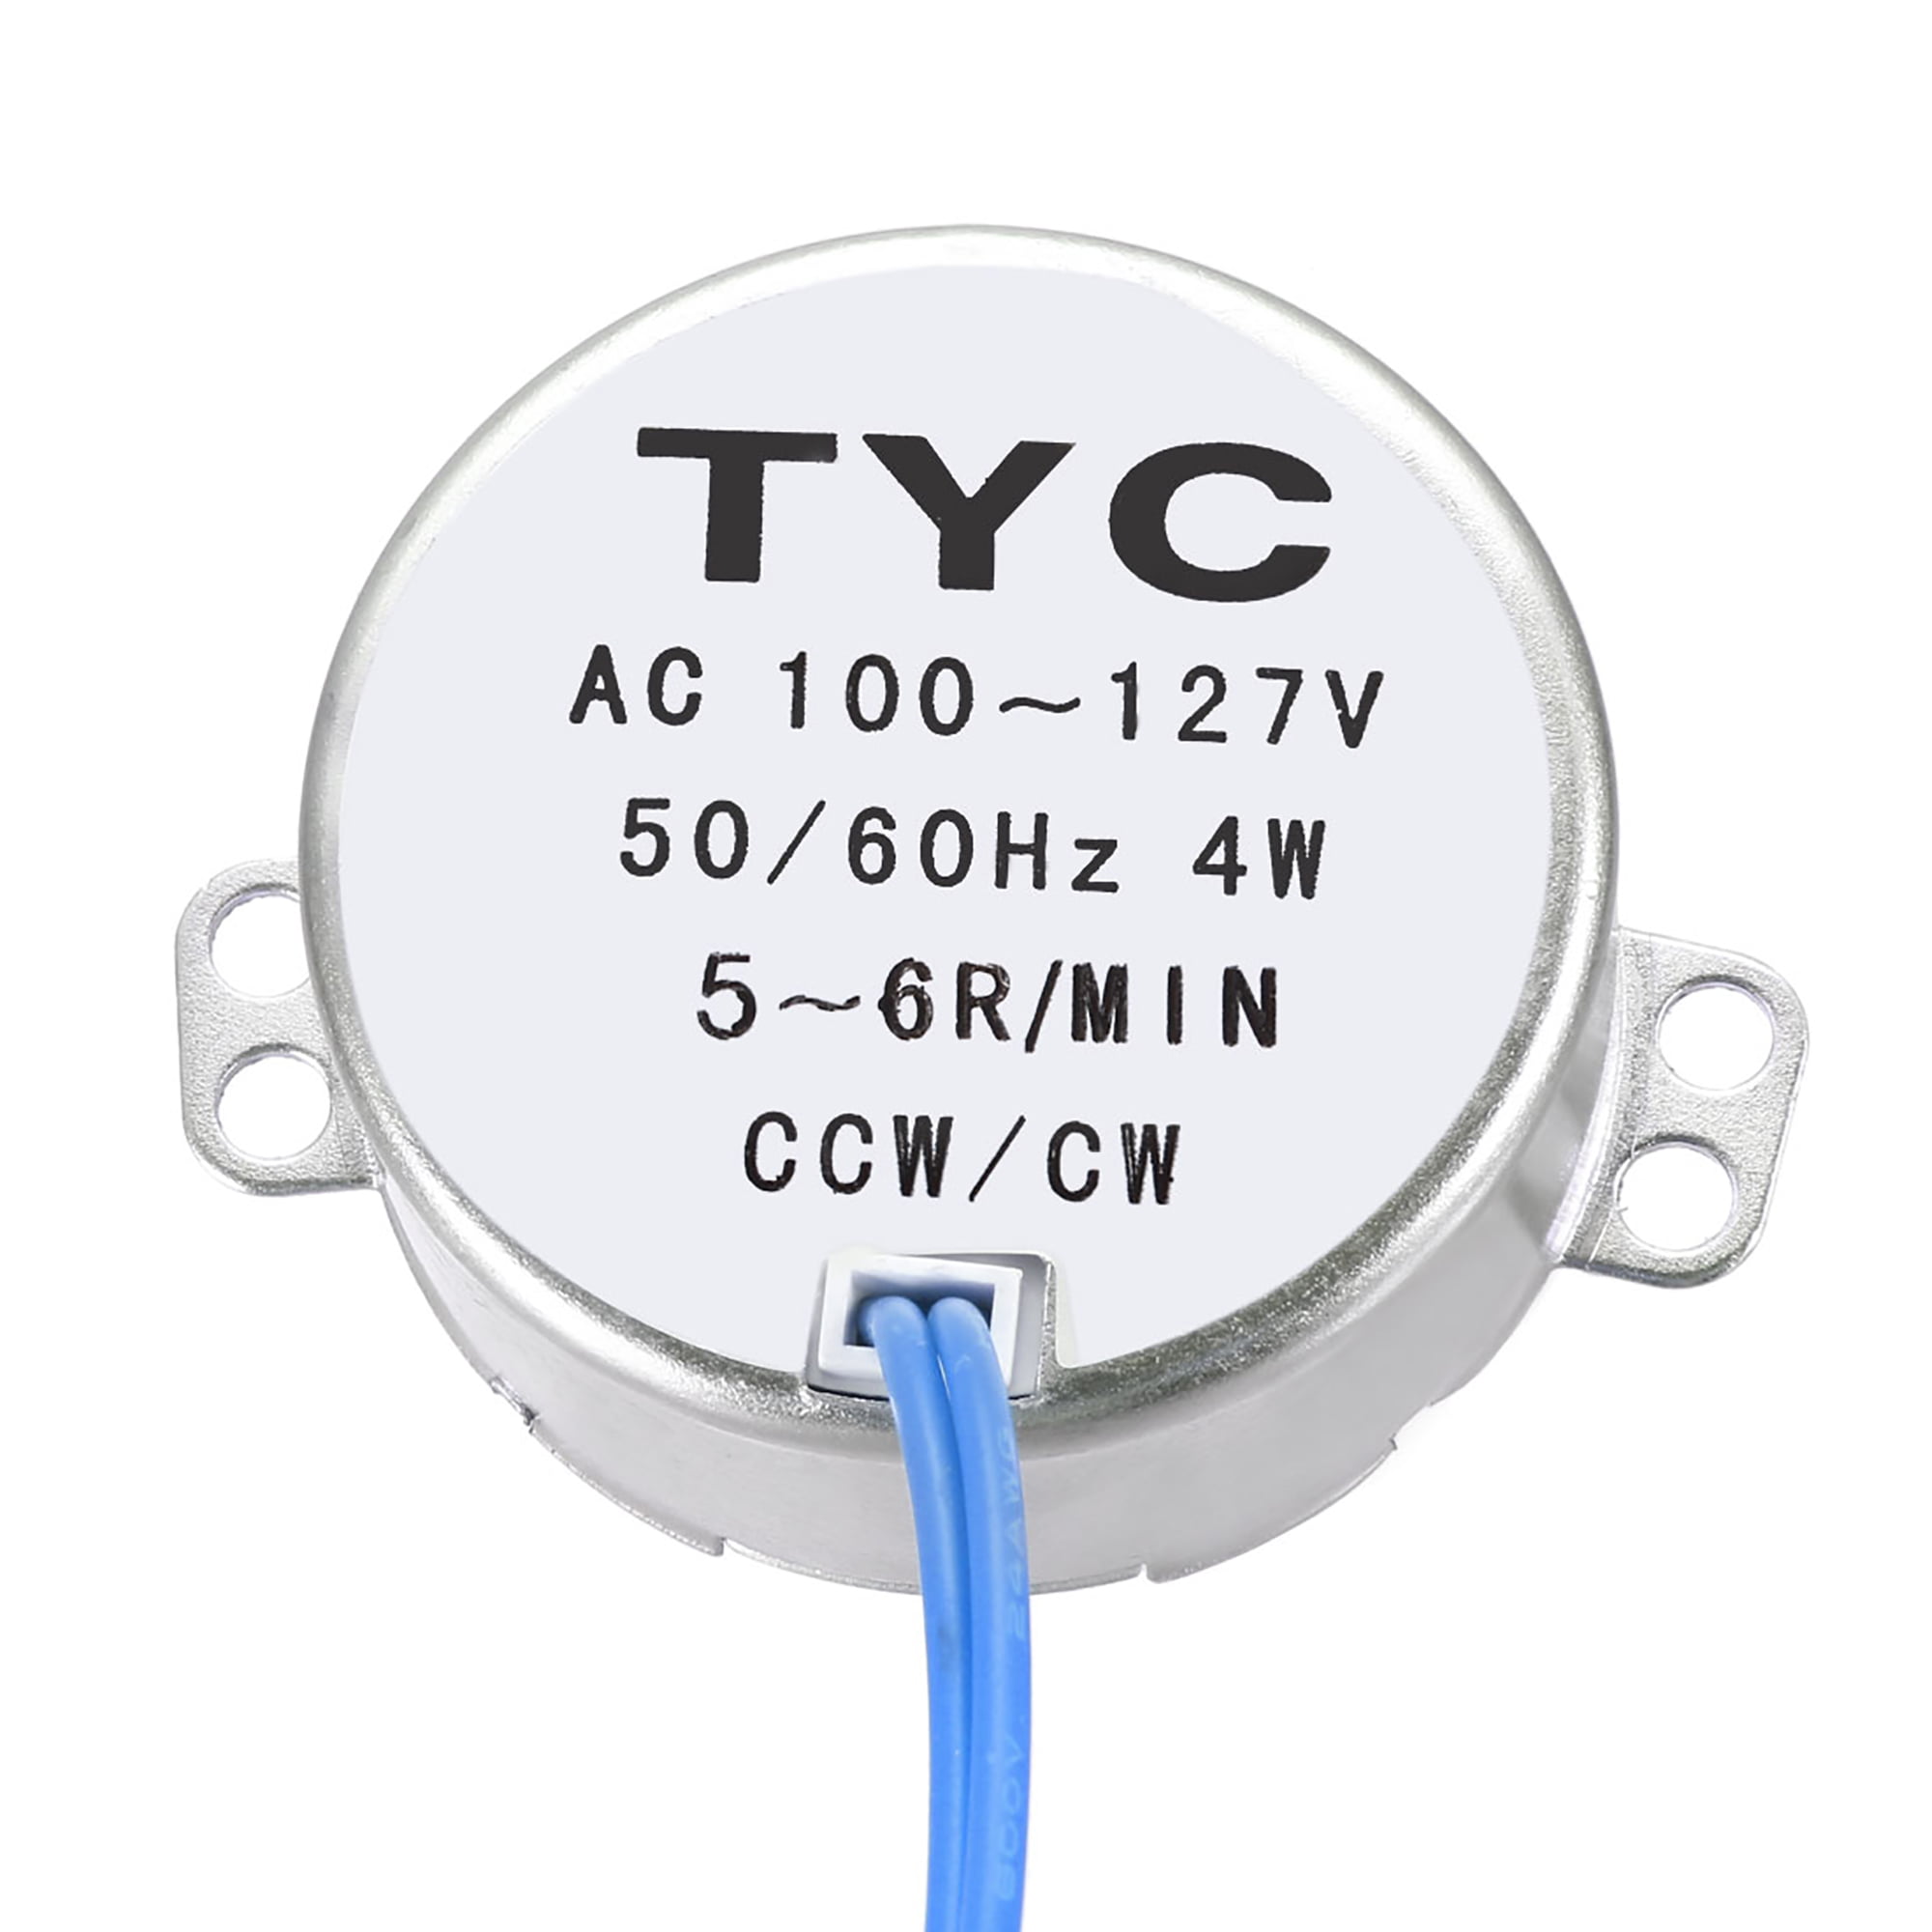 Details about   Synchronous Synchron Motor AC 100-127V 4W 5-6RPM/MIN 50-60Hz CW for Hand-Made 